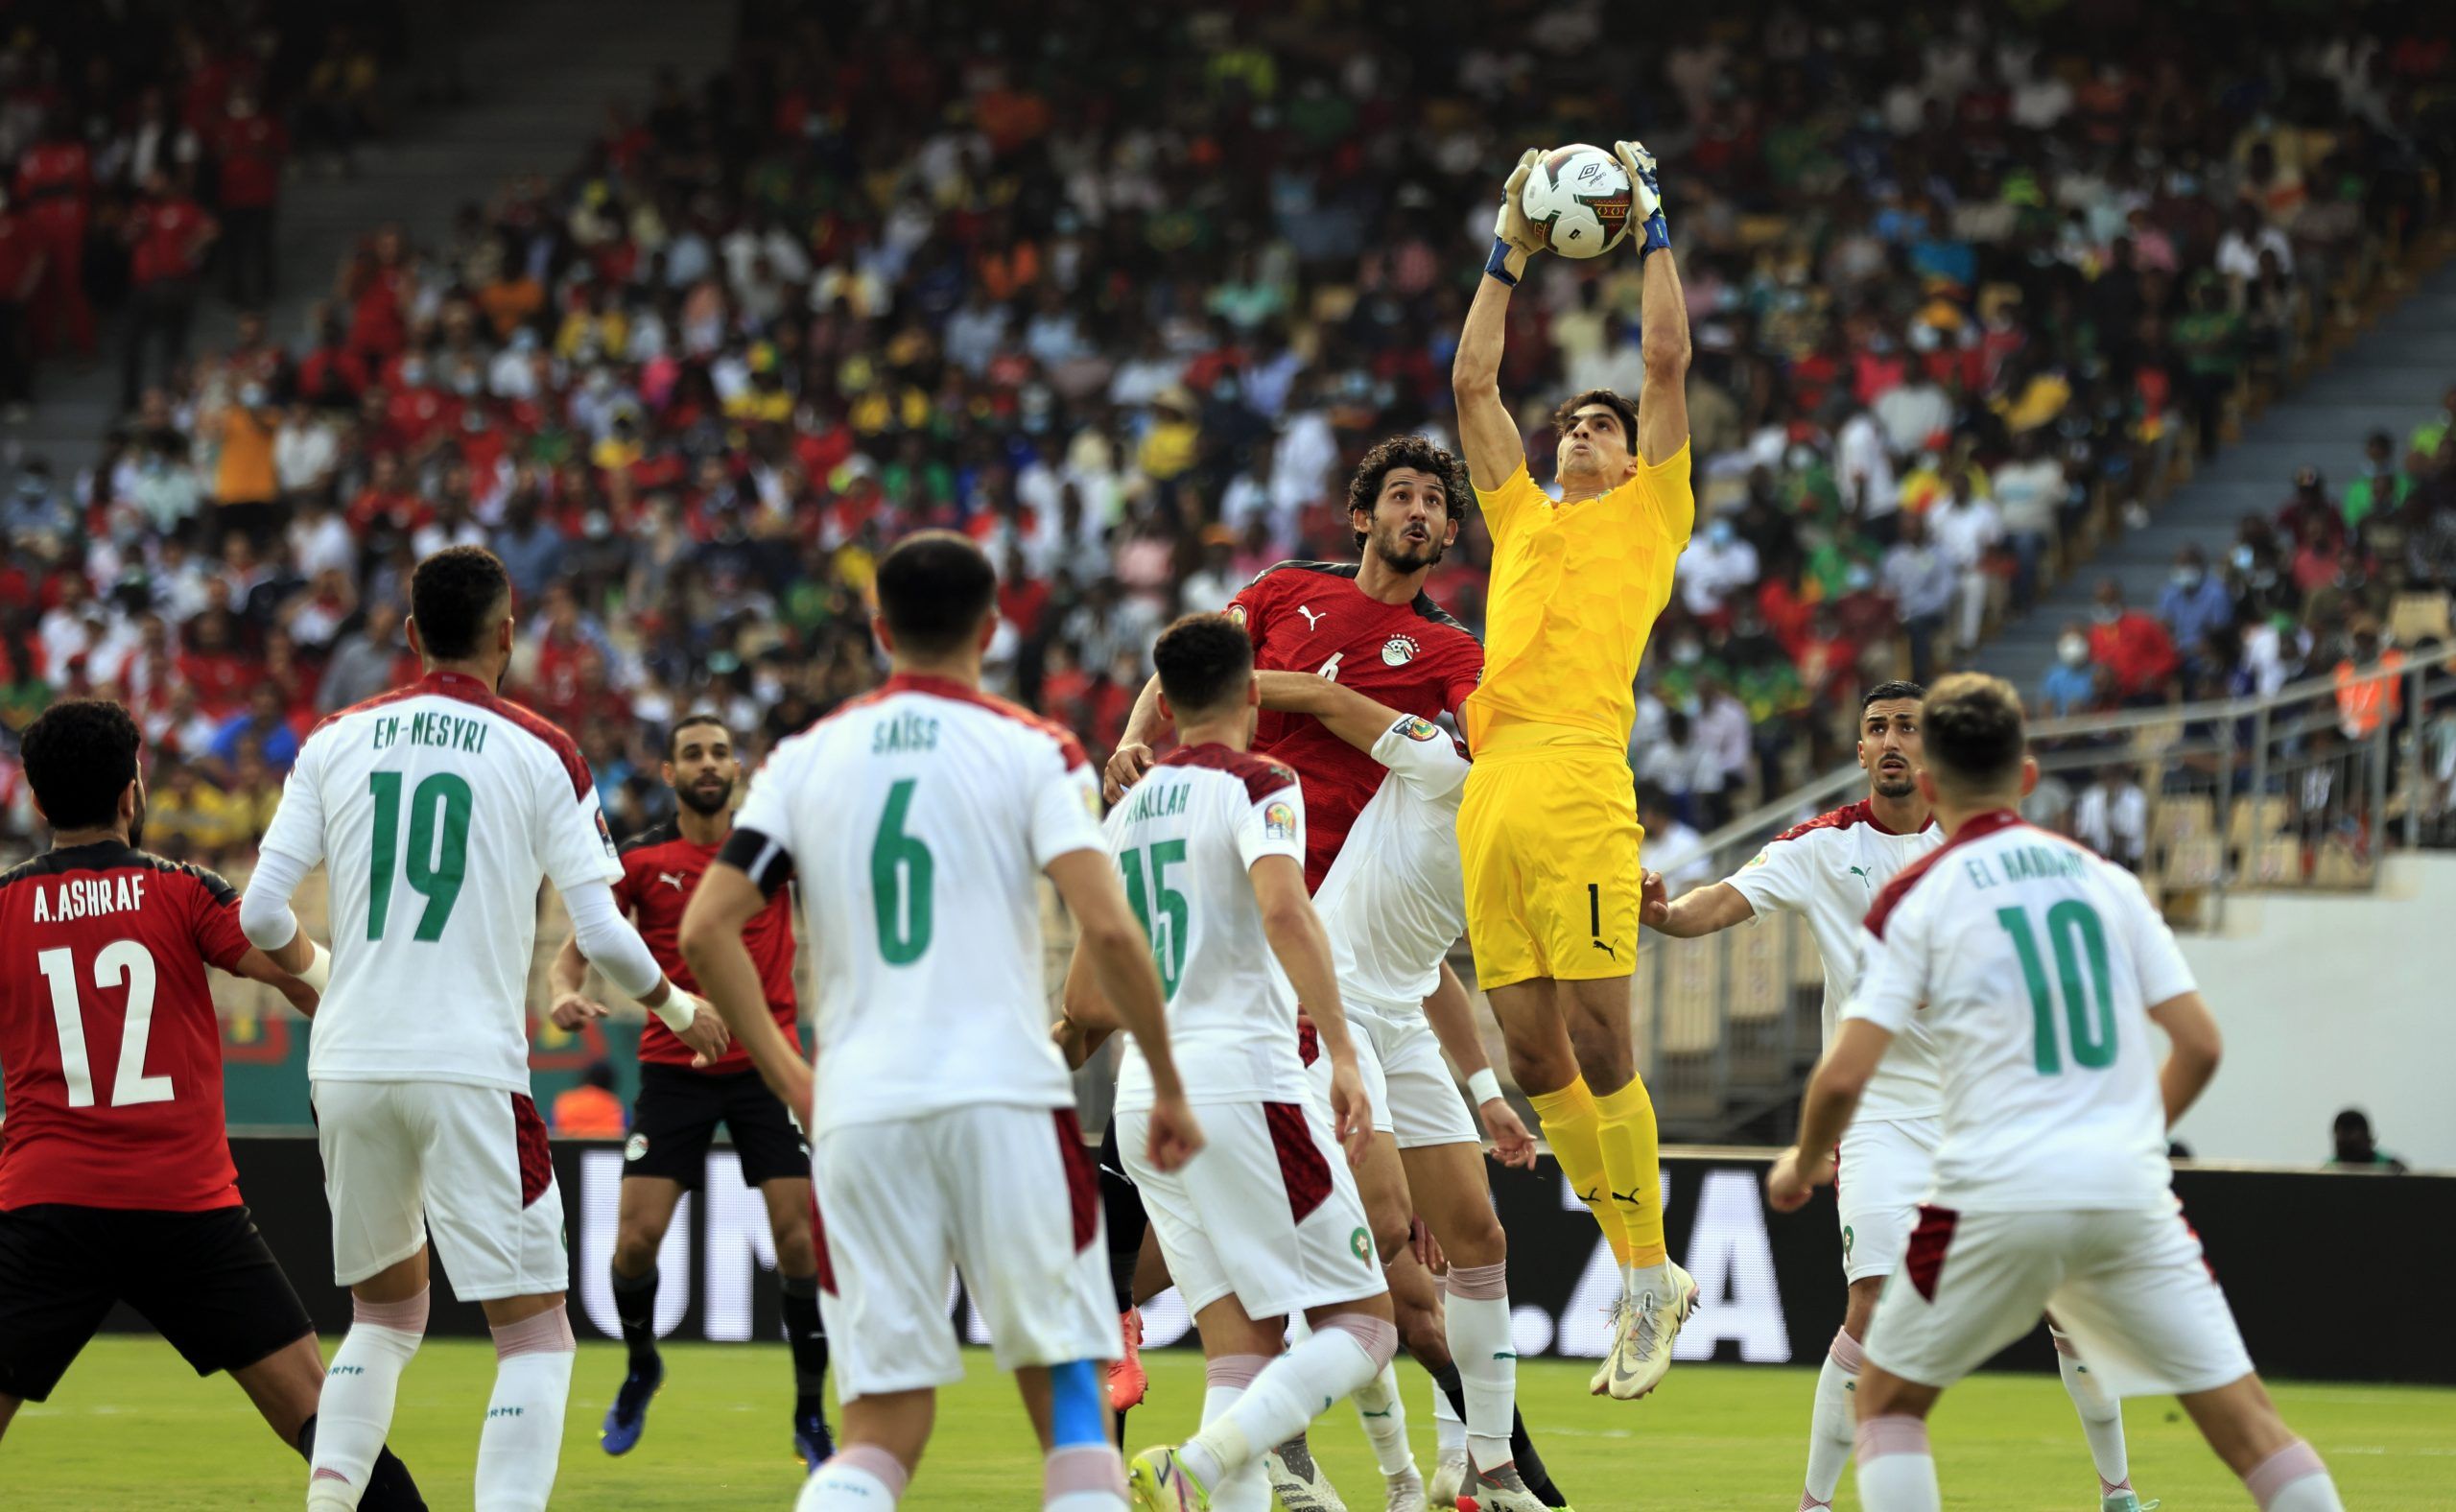 Soccer Football - Africa Cup of Nations -  Quarter Final - Egypt v Morocco -  Ahmadou Ahidjo Stadium, Yaounde, Cameroon - January 30, 2022 Egypt's Ahmed Hegazi in action with Morocco's Yassine Bounou REUTERS/Thaier Al-Sudani